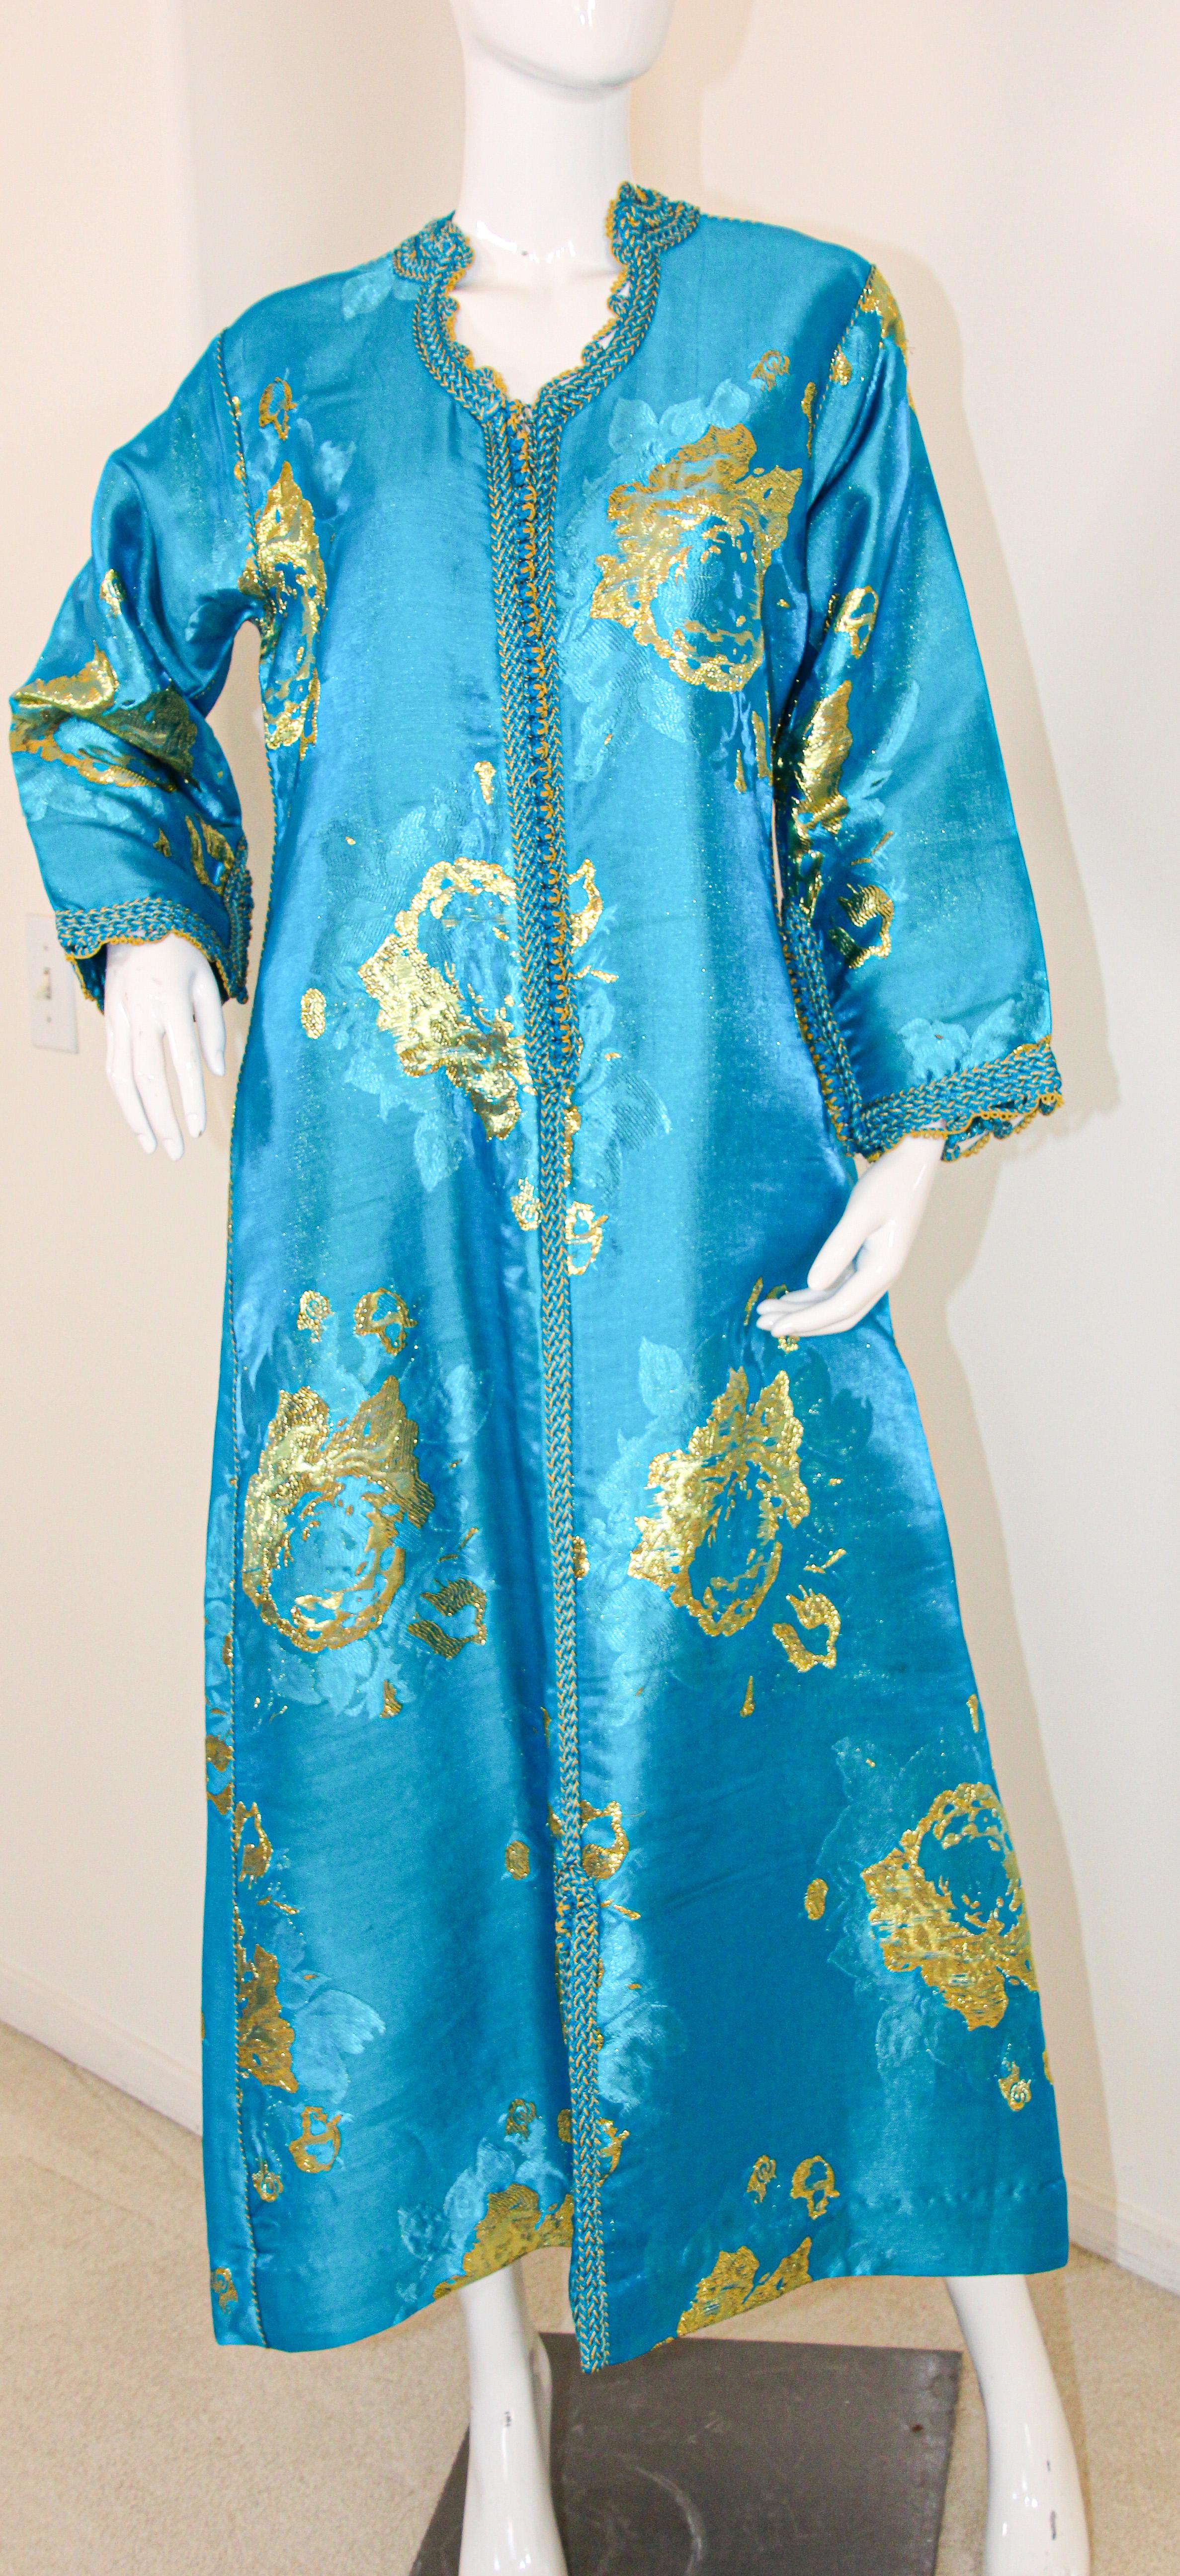 Moroccan Vintage Kaftan in Turquoise and Gold Floral Brocade Metallic Lame 12